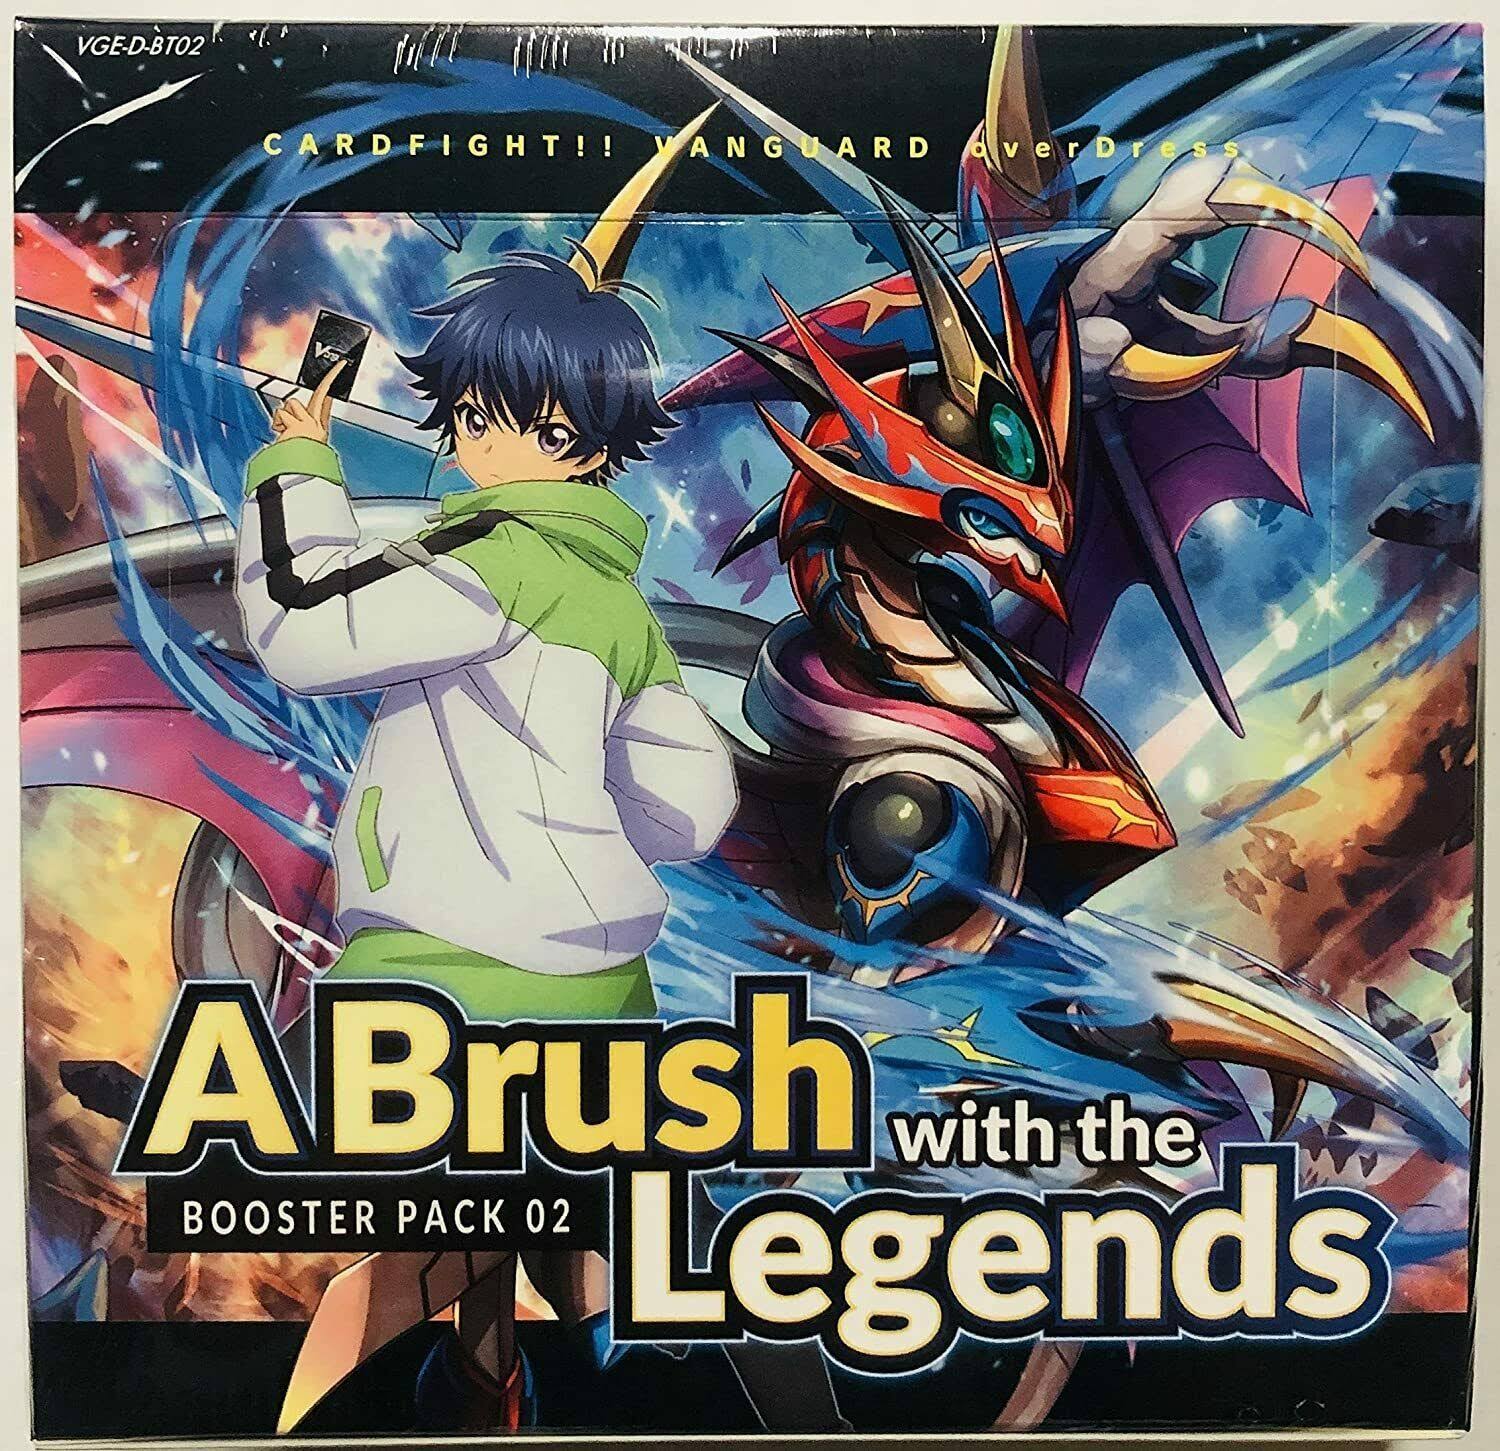 Cardfight Vanguard: OverDress 02 - A Brush with the Legends Booster Pack